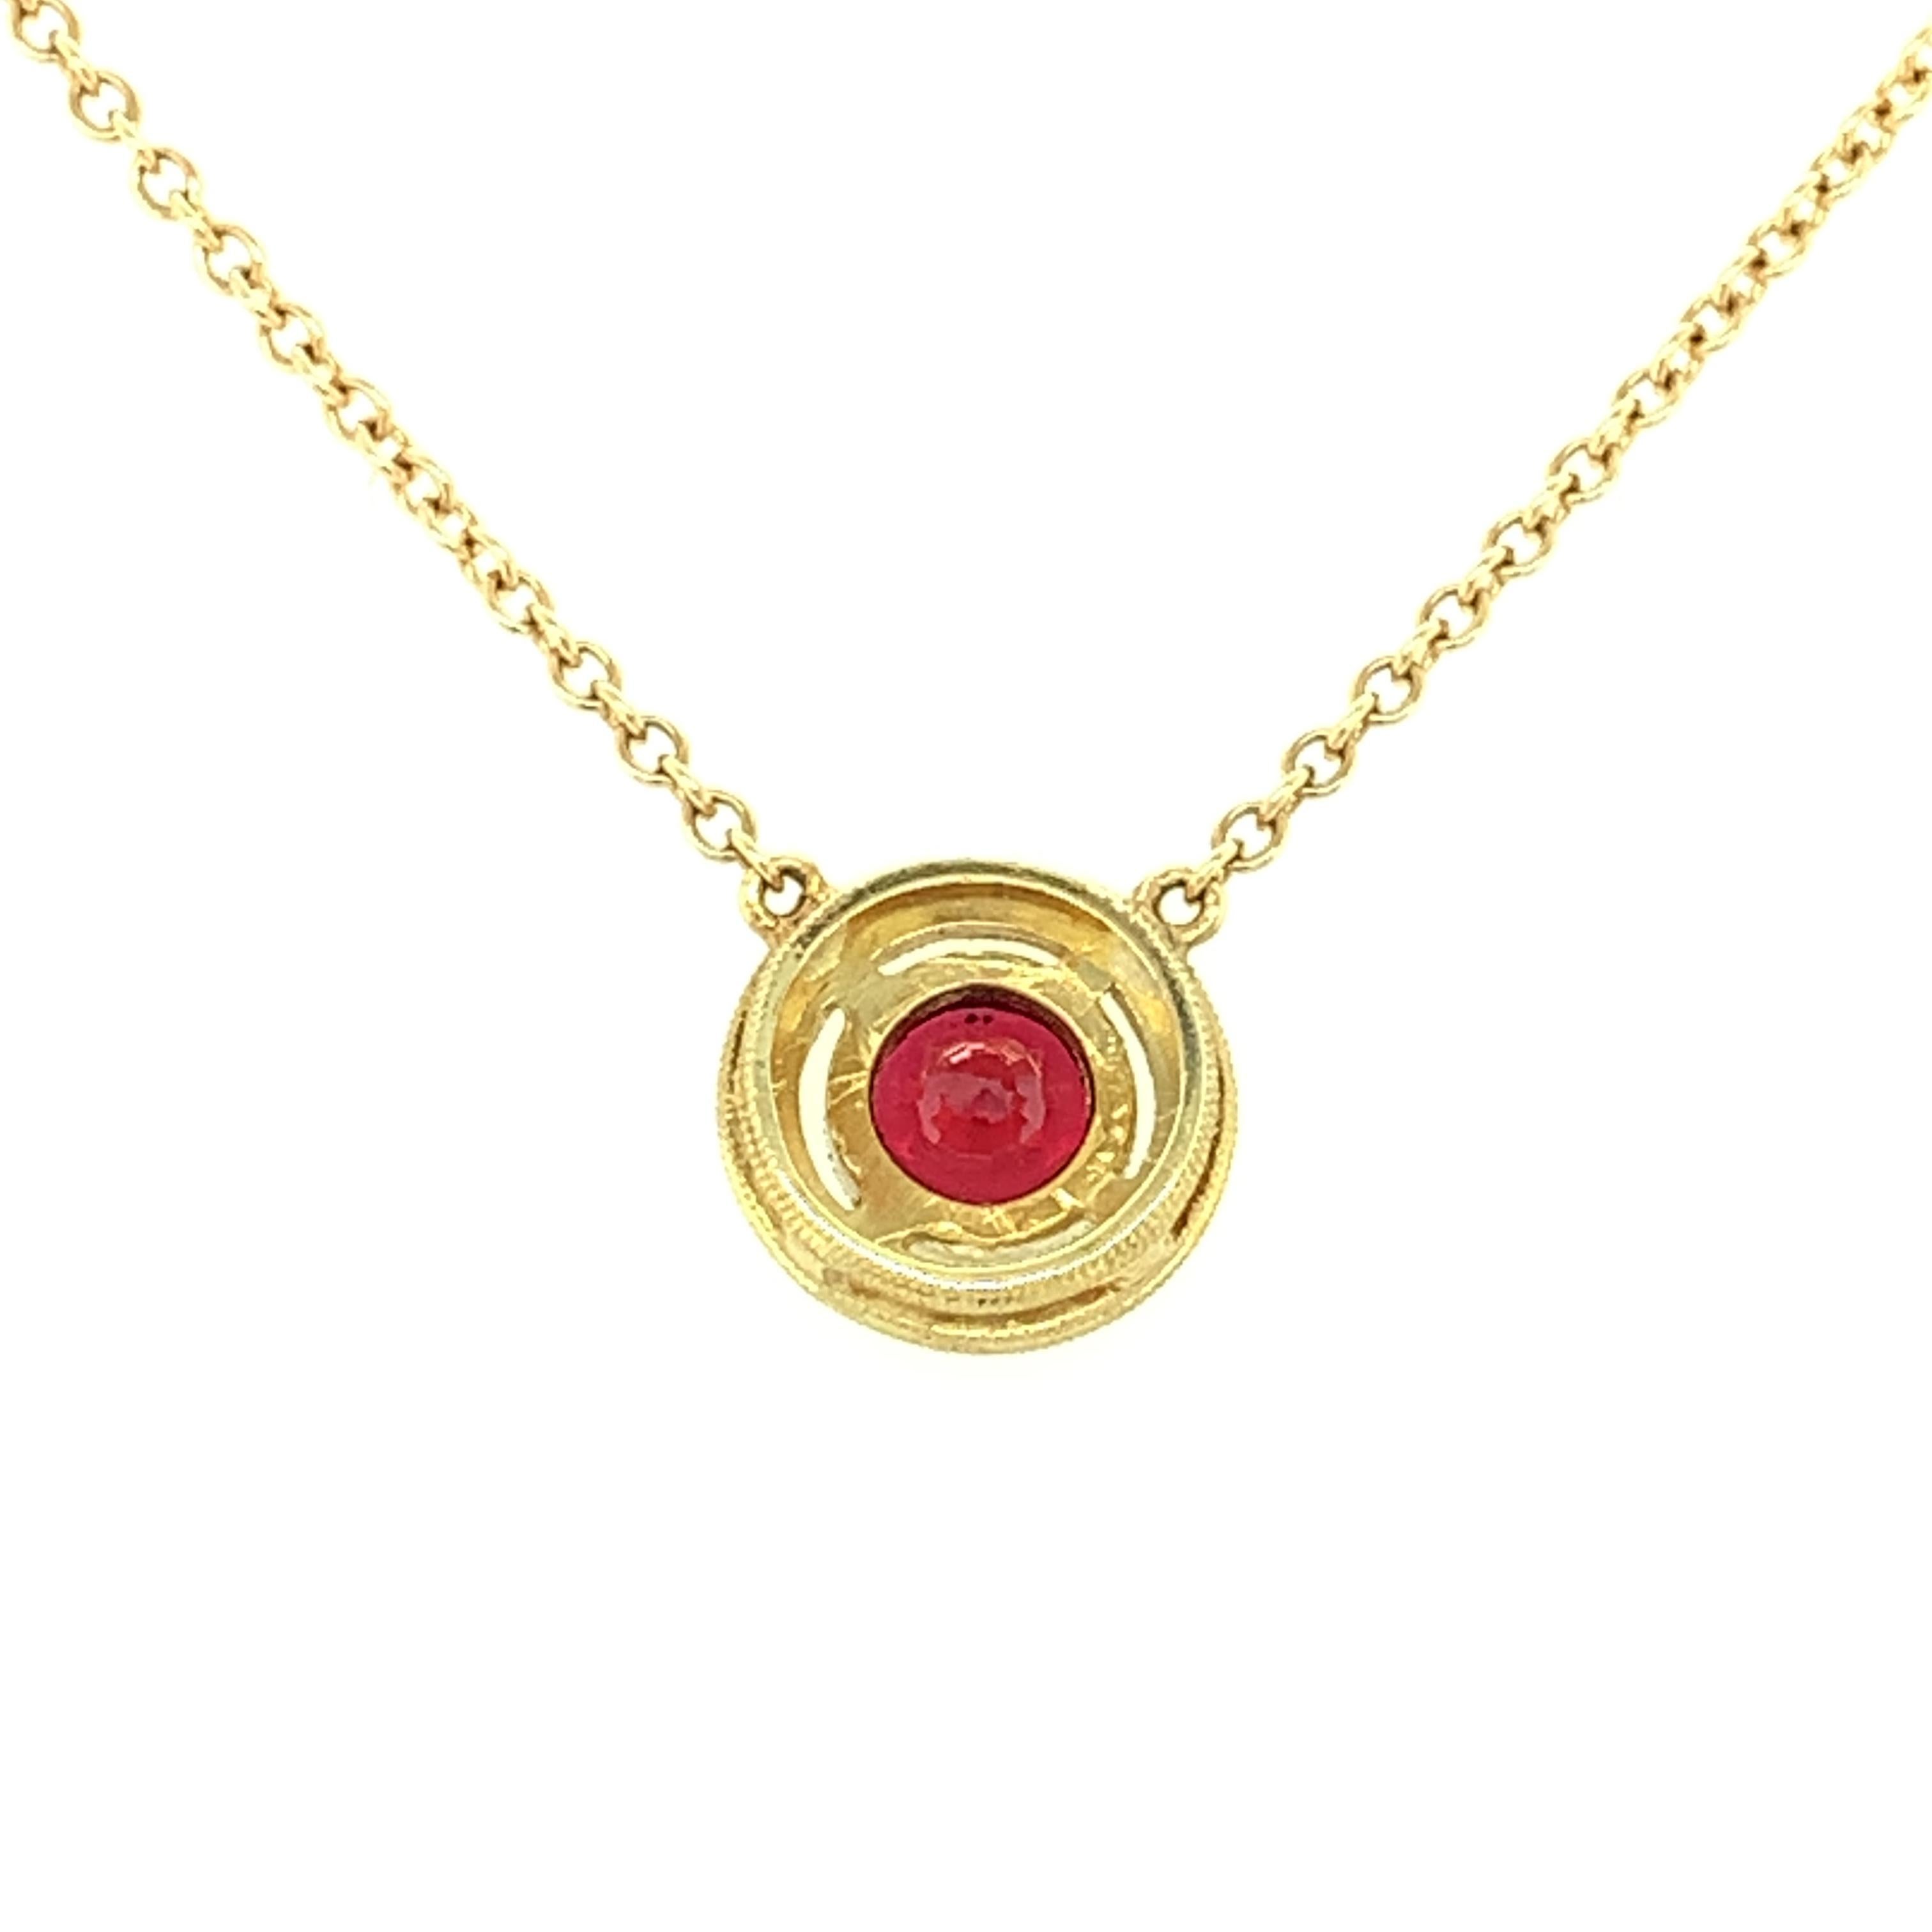 gold necklace with red pendant